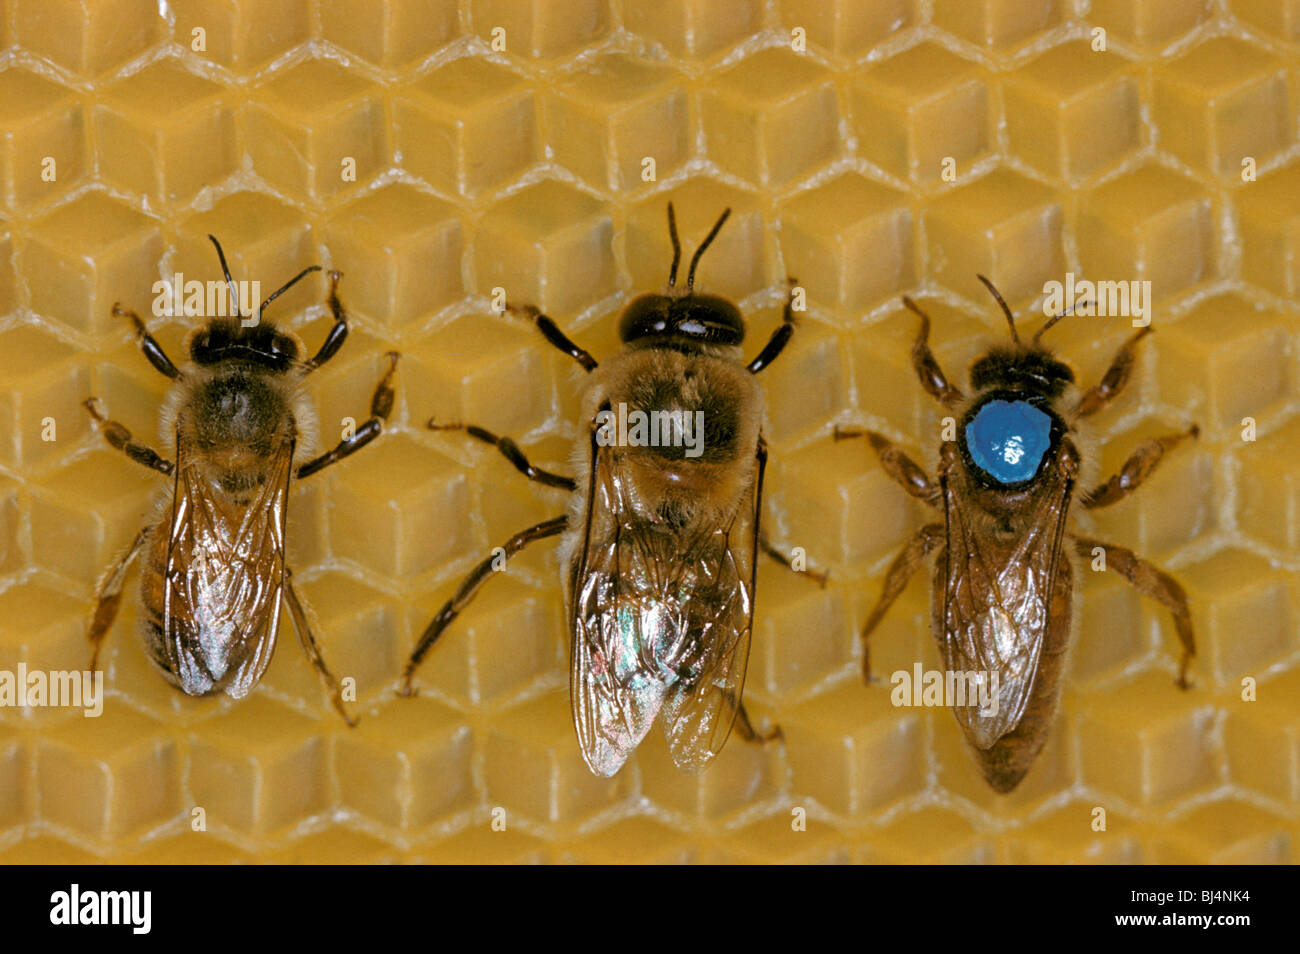 Honey Bee (Apis mellifera), worker left, drone centre, and queen right Stock Photo